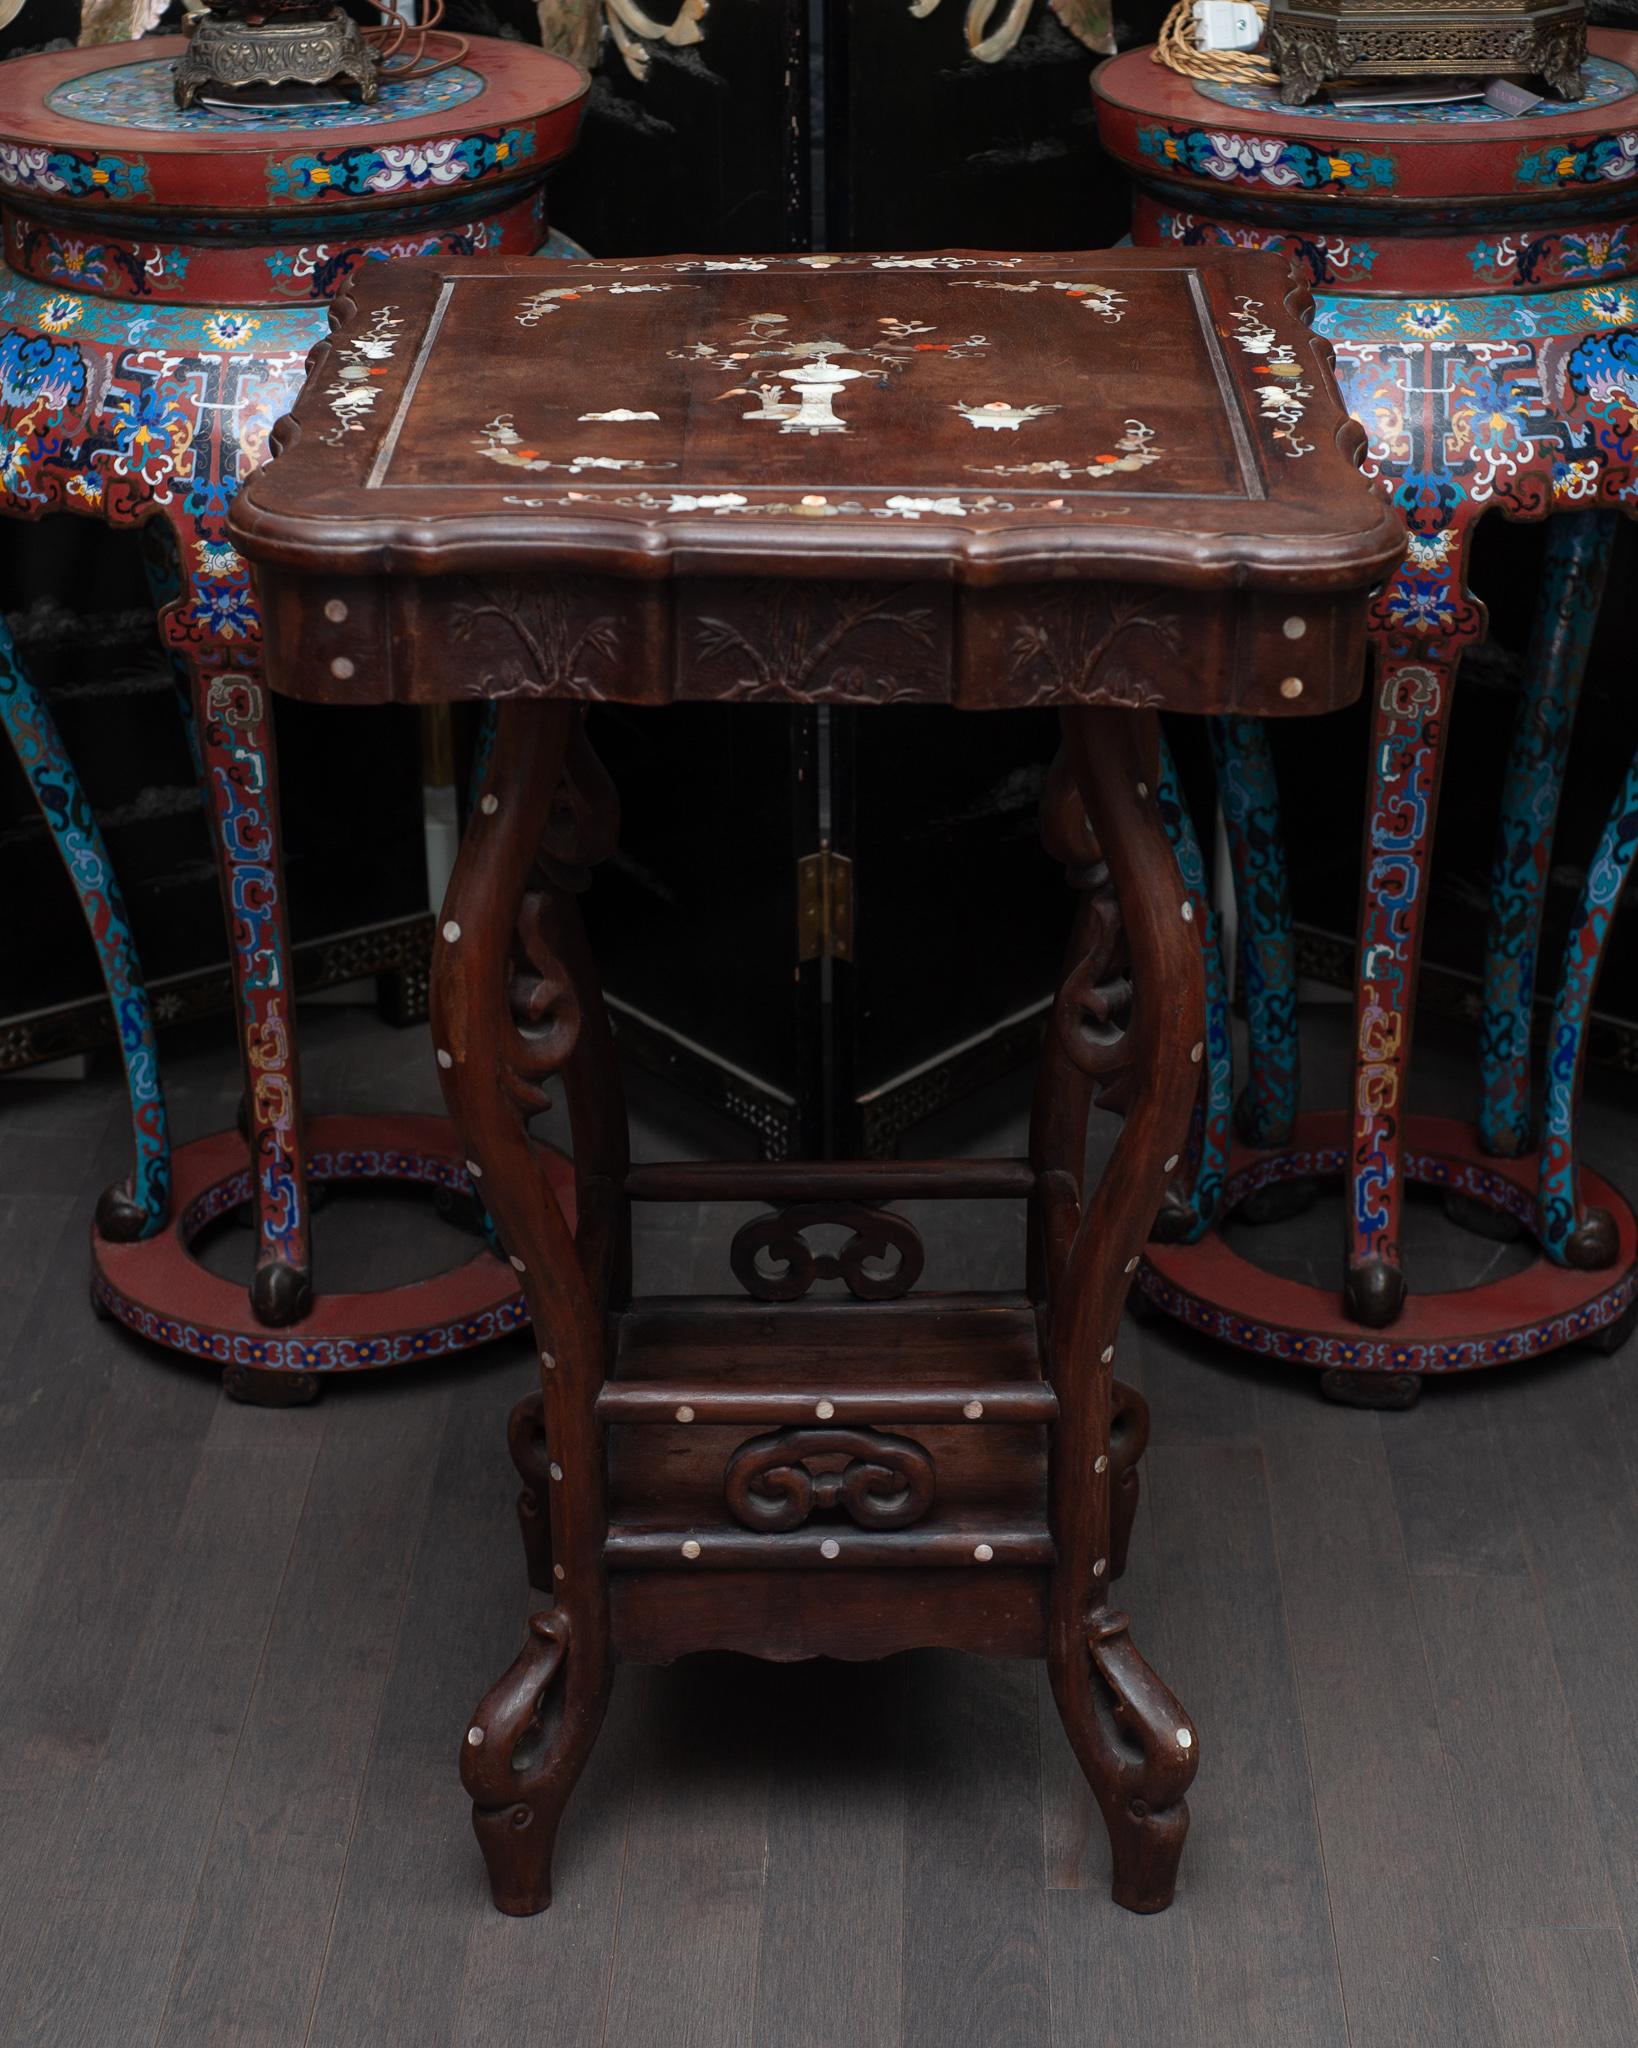 An unusual Chinese antique carved wood table with beautiful mother of pearl inlay.